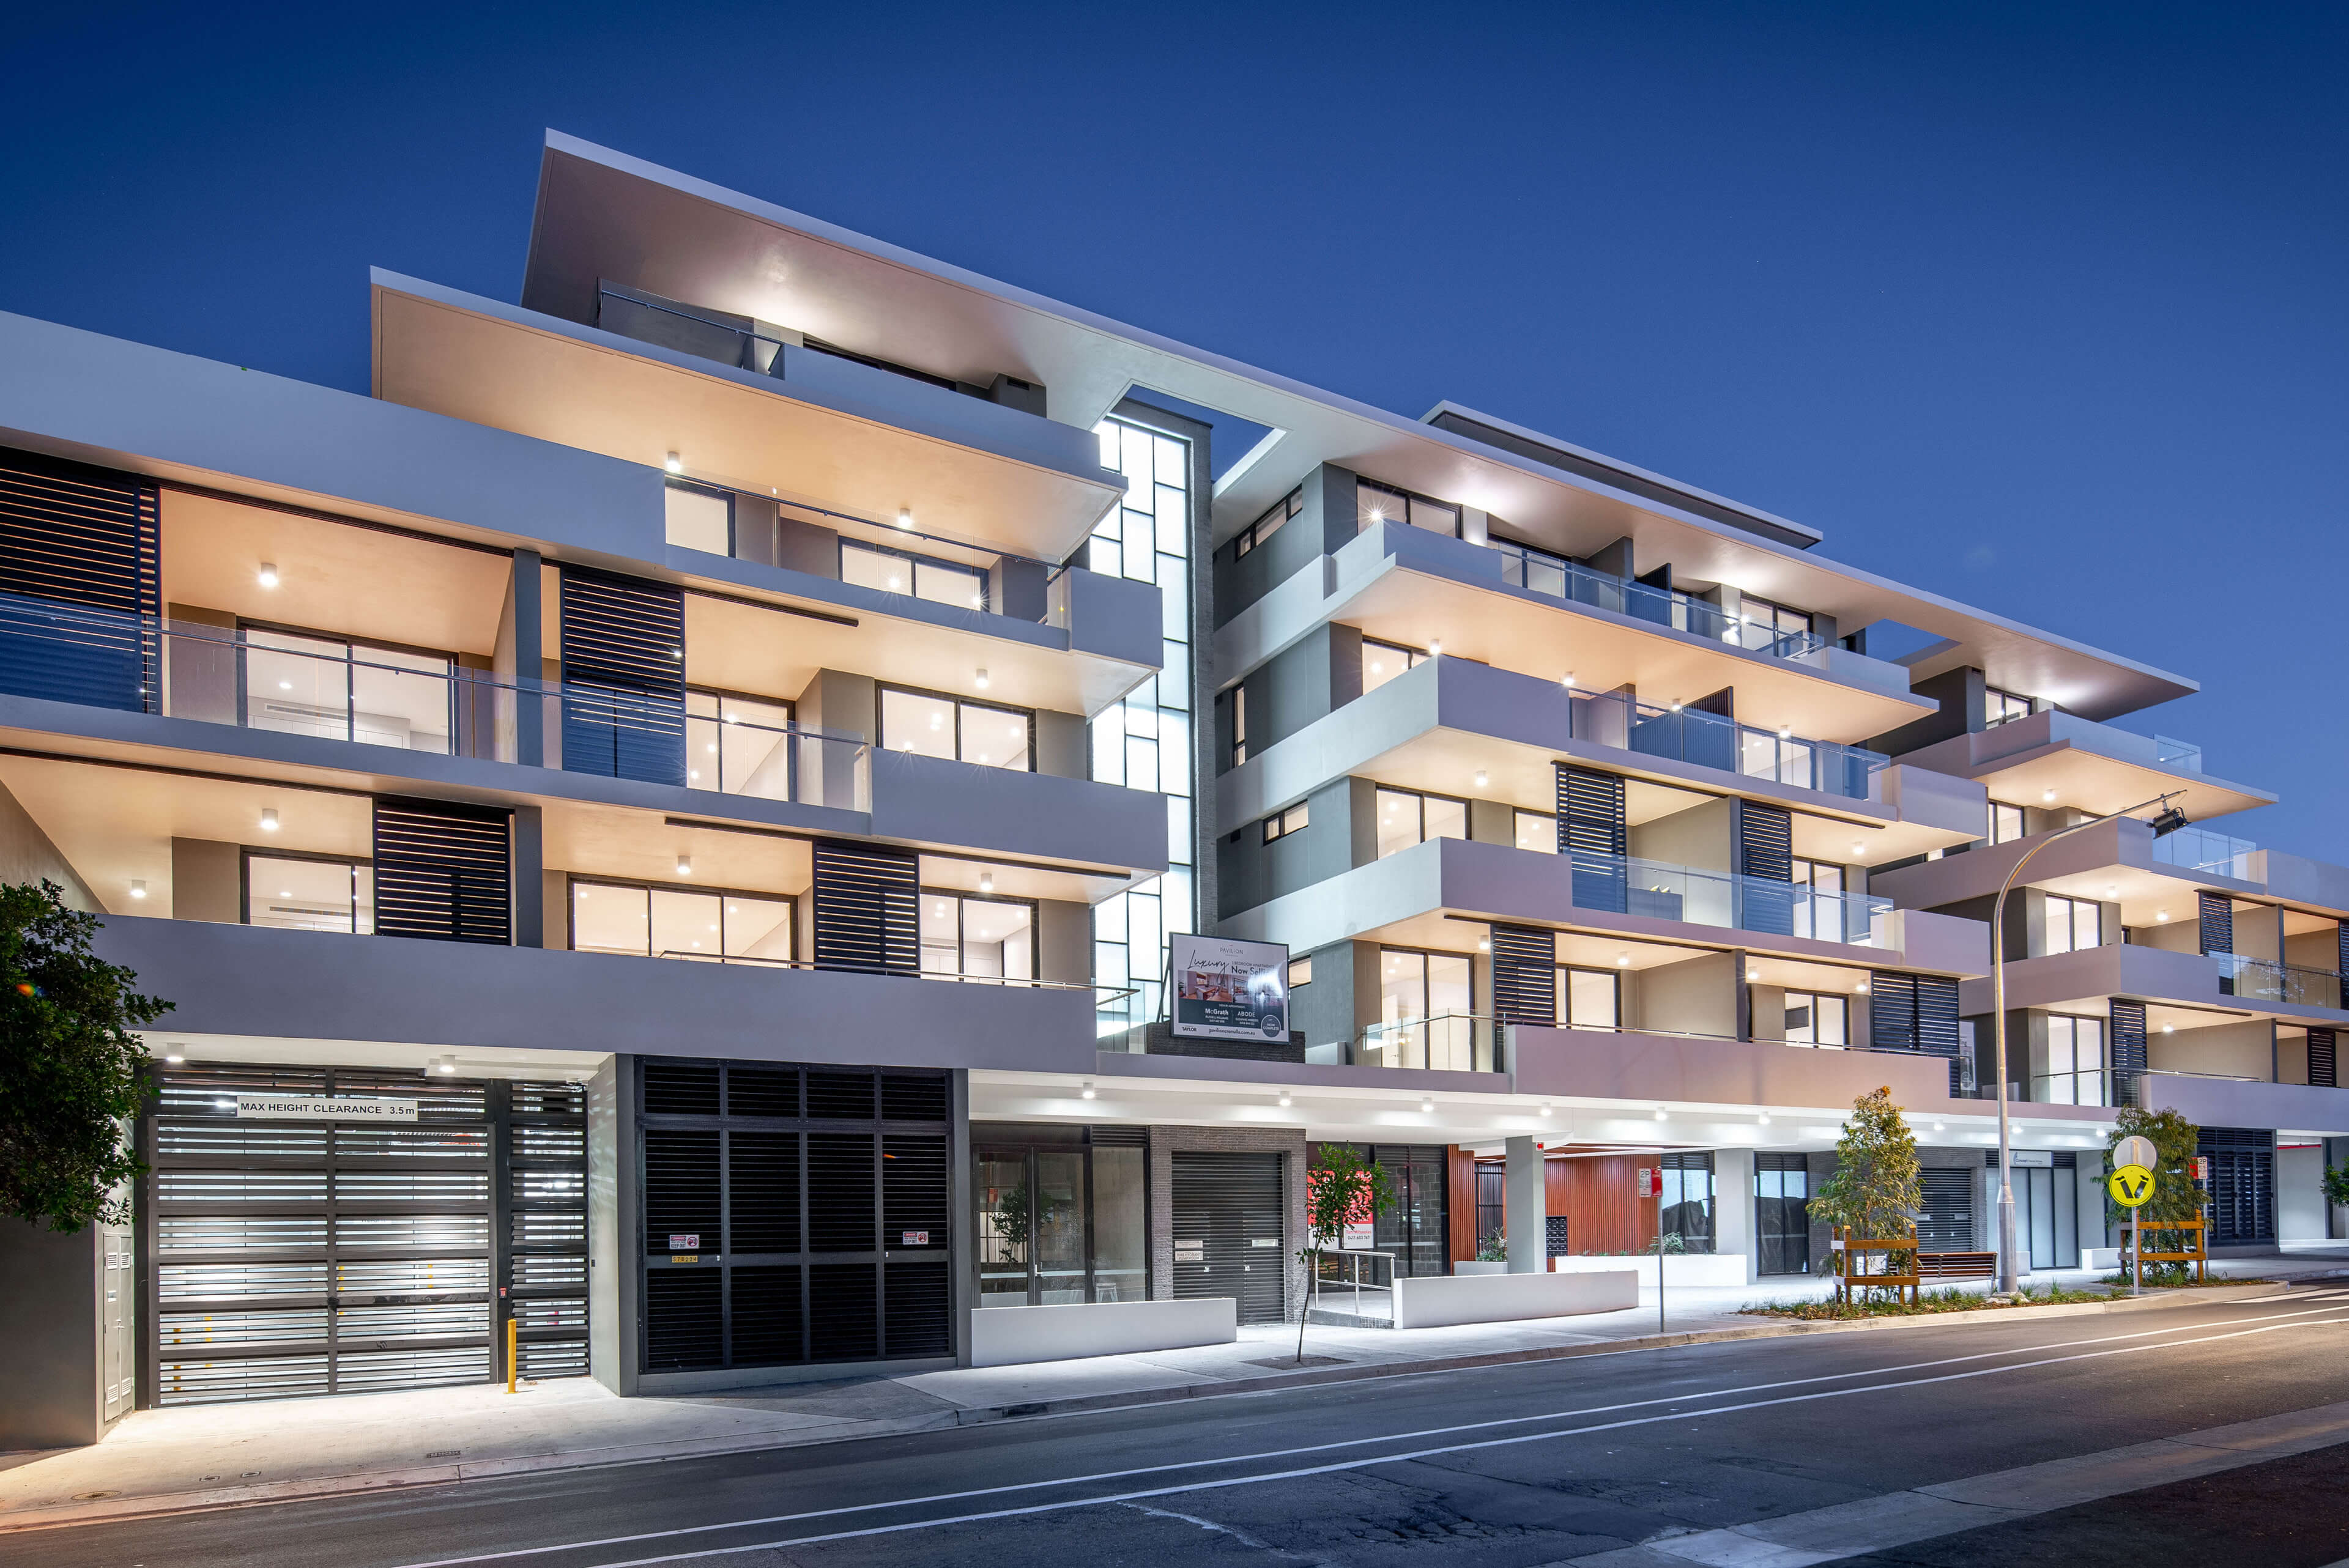 14 exterior night pavilion apartments cronulla taylor construction residential